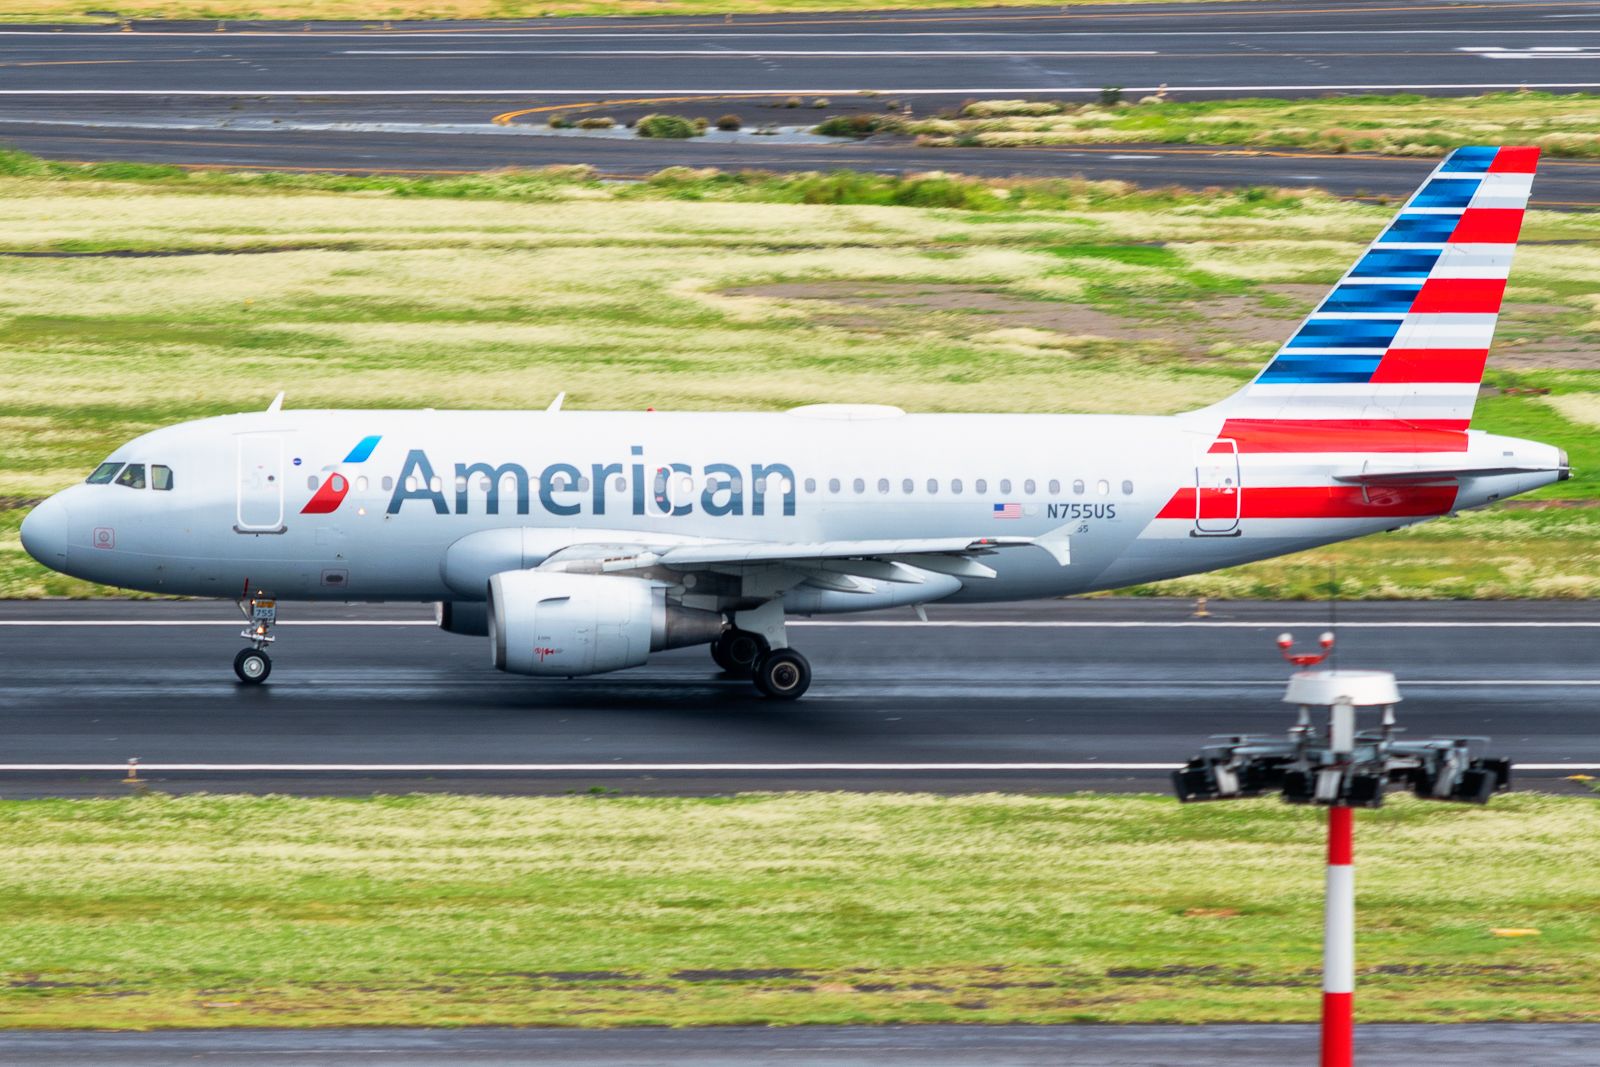 An American Airlines Airbus A319.